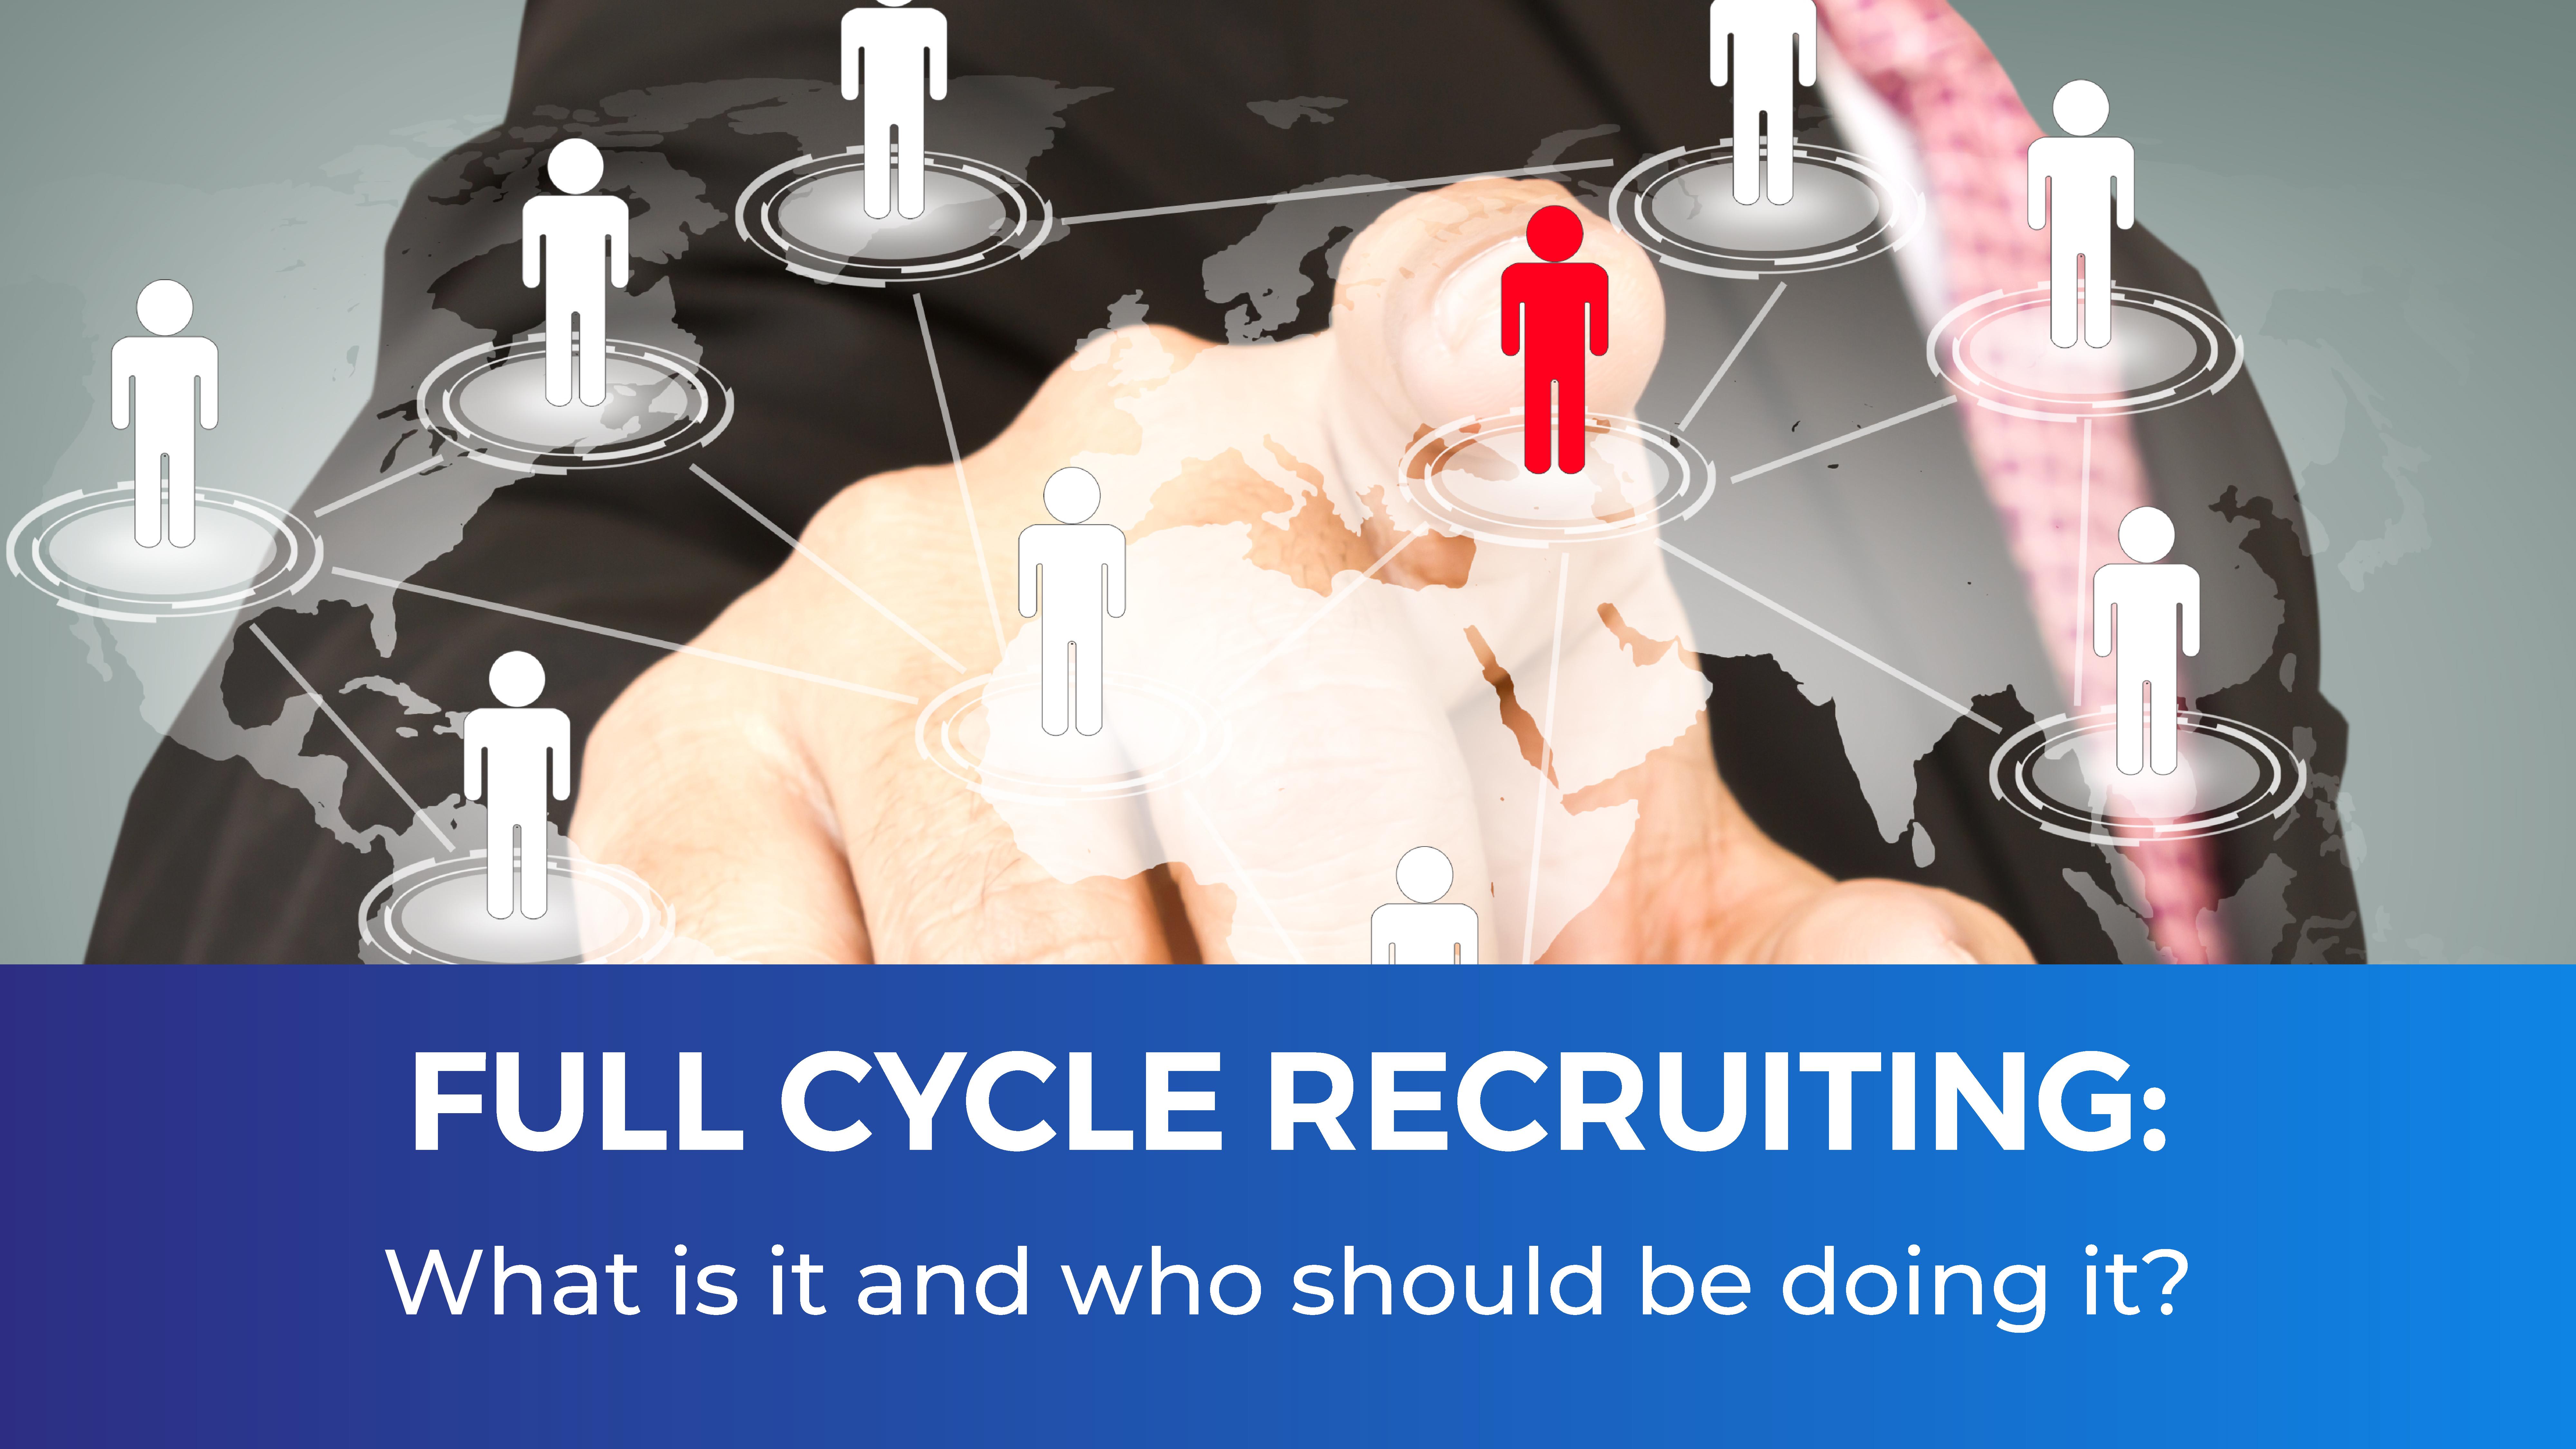 Full cycle recruiting: what is it and who should be doing it?